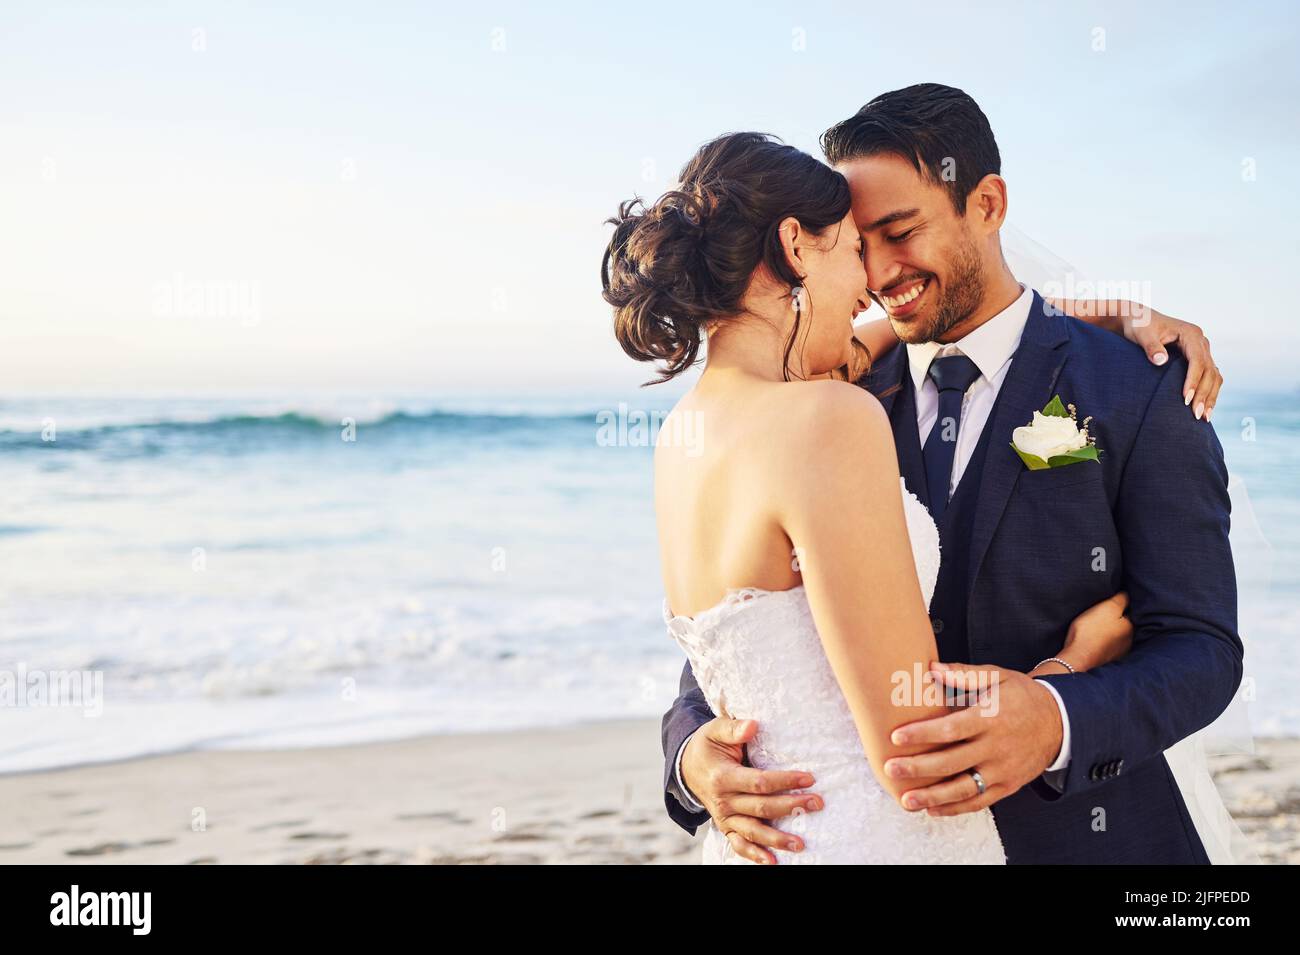 This is the best day of my life. Shot of a young couple on the beach on their wedding day. Stock Photo